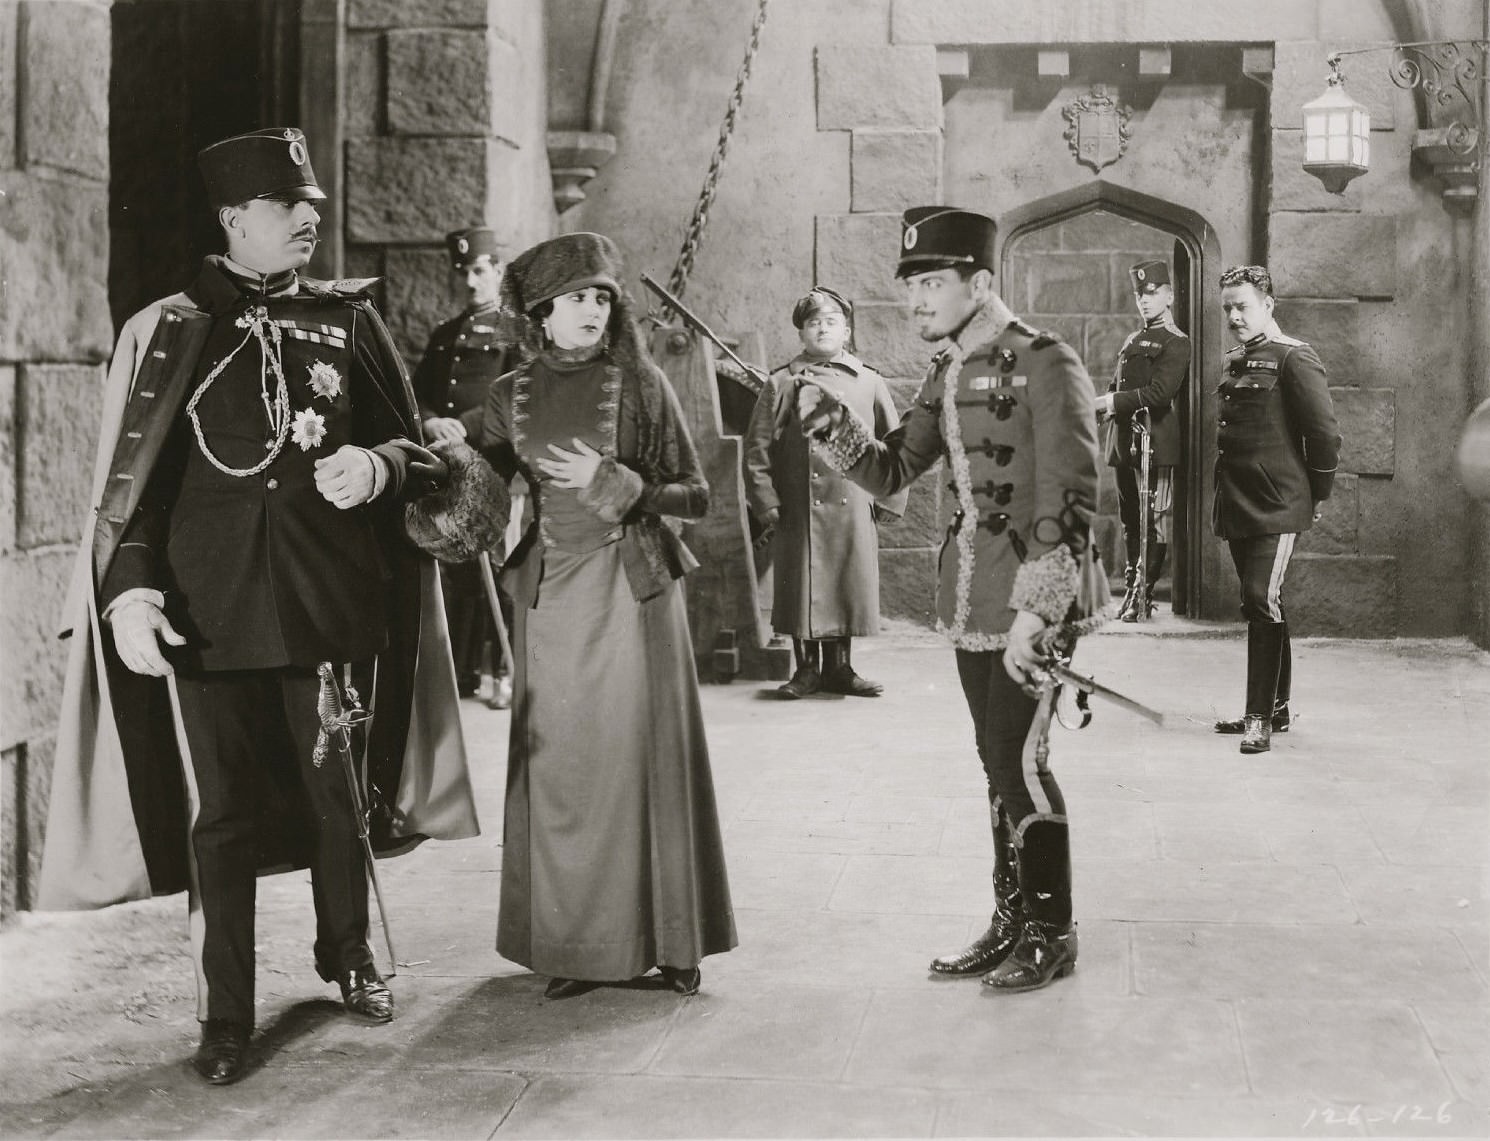 Barbara La Marr in "The Prisoner of Zenda", 1922 with with Stuart Holmes (on her right) and Ramon Novarro (on right in foreground)